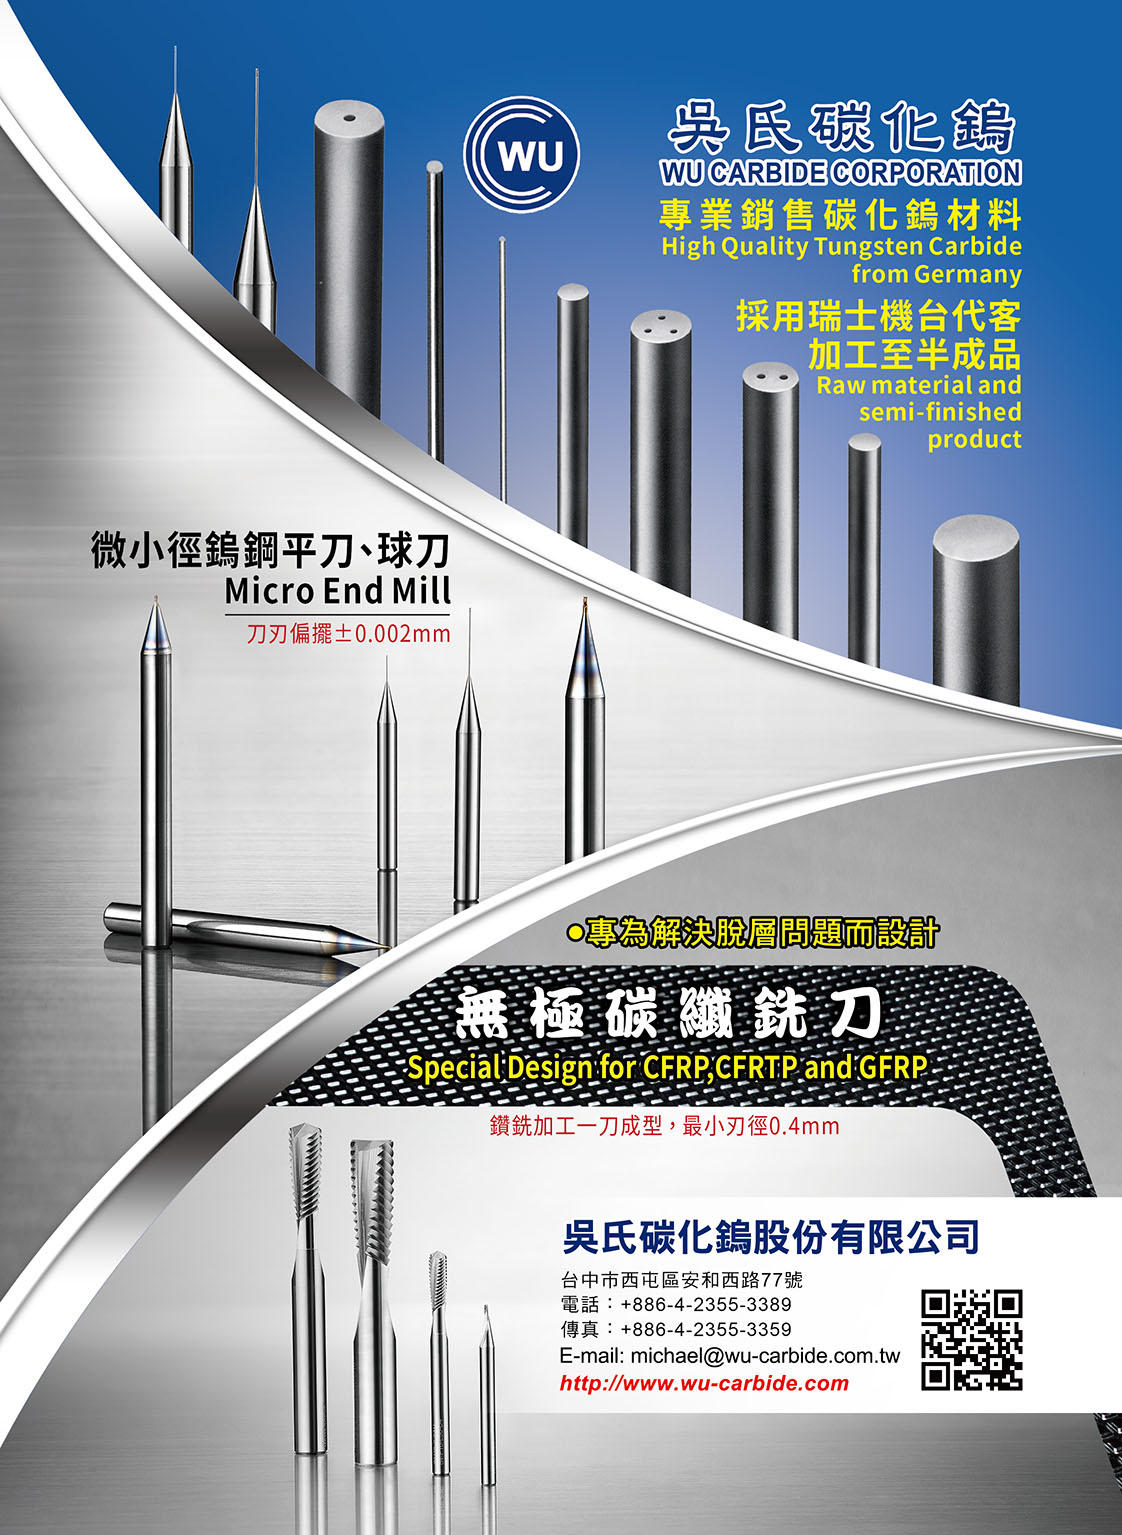 2020 TAIWAN MOLD & MOLDING PRODUCTS